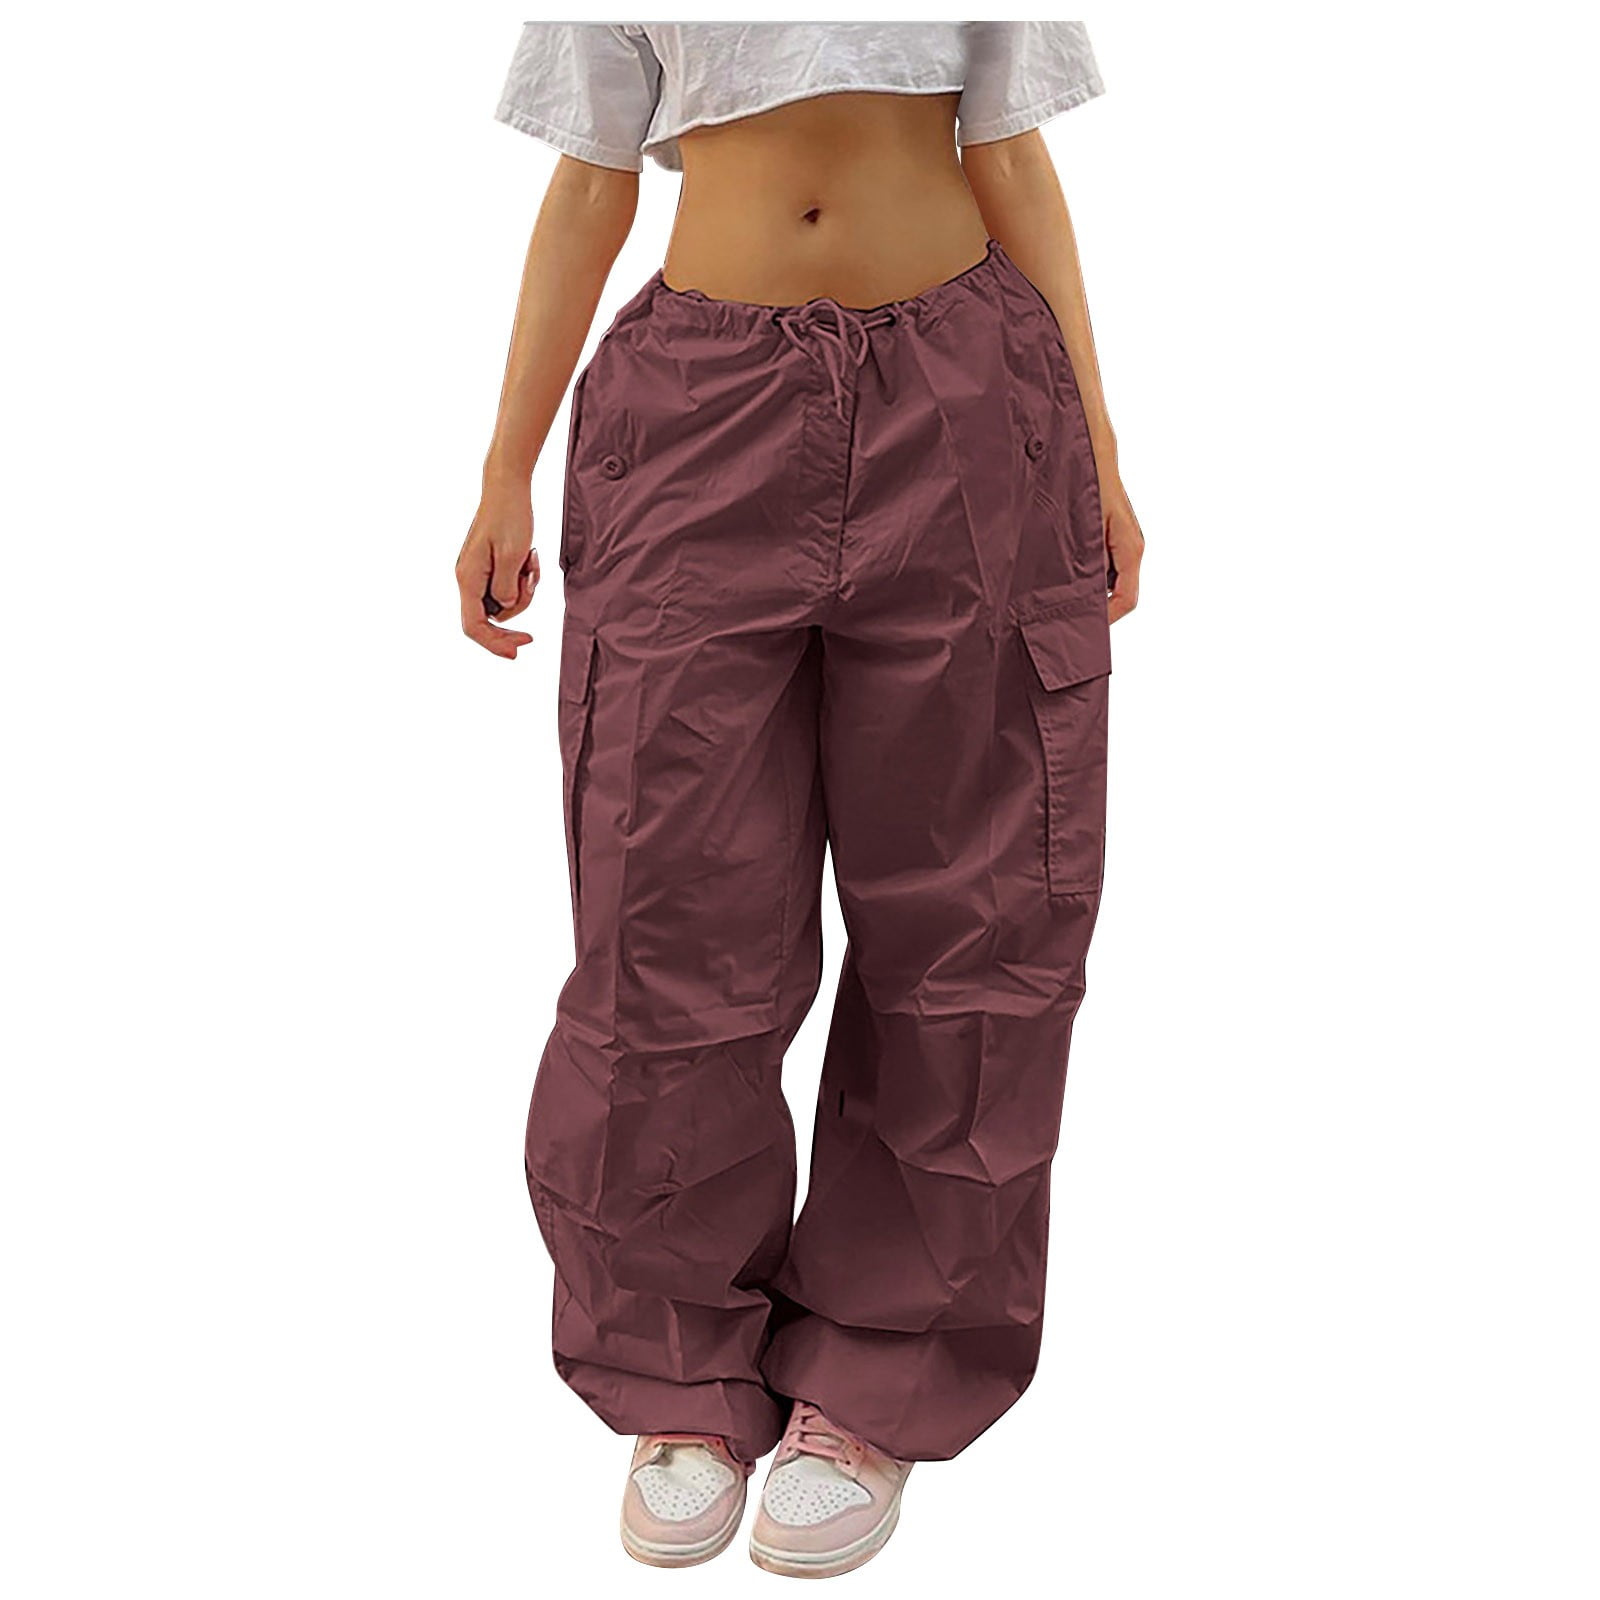 CAICJ98 Womens Pants Women's Lightweight Quick Dry Striped Side Jogger  Sweatpants with Pocket Red,XXL 